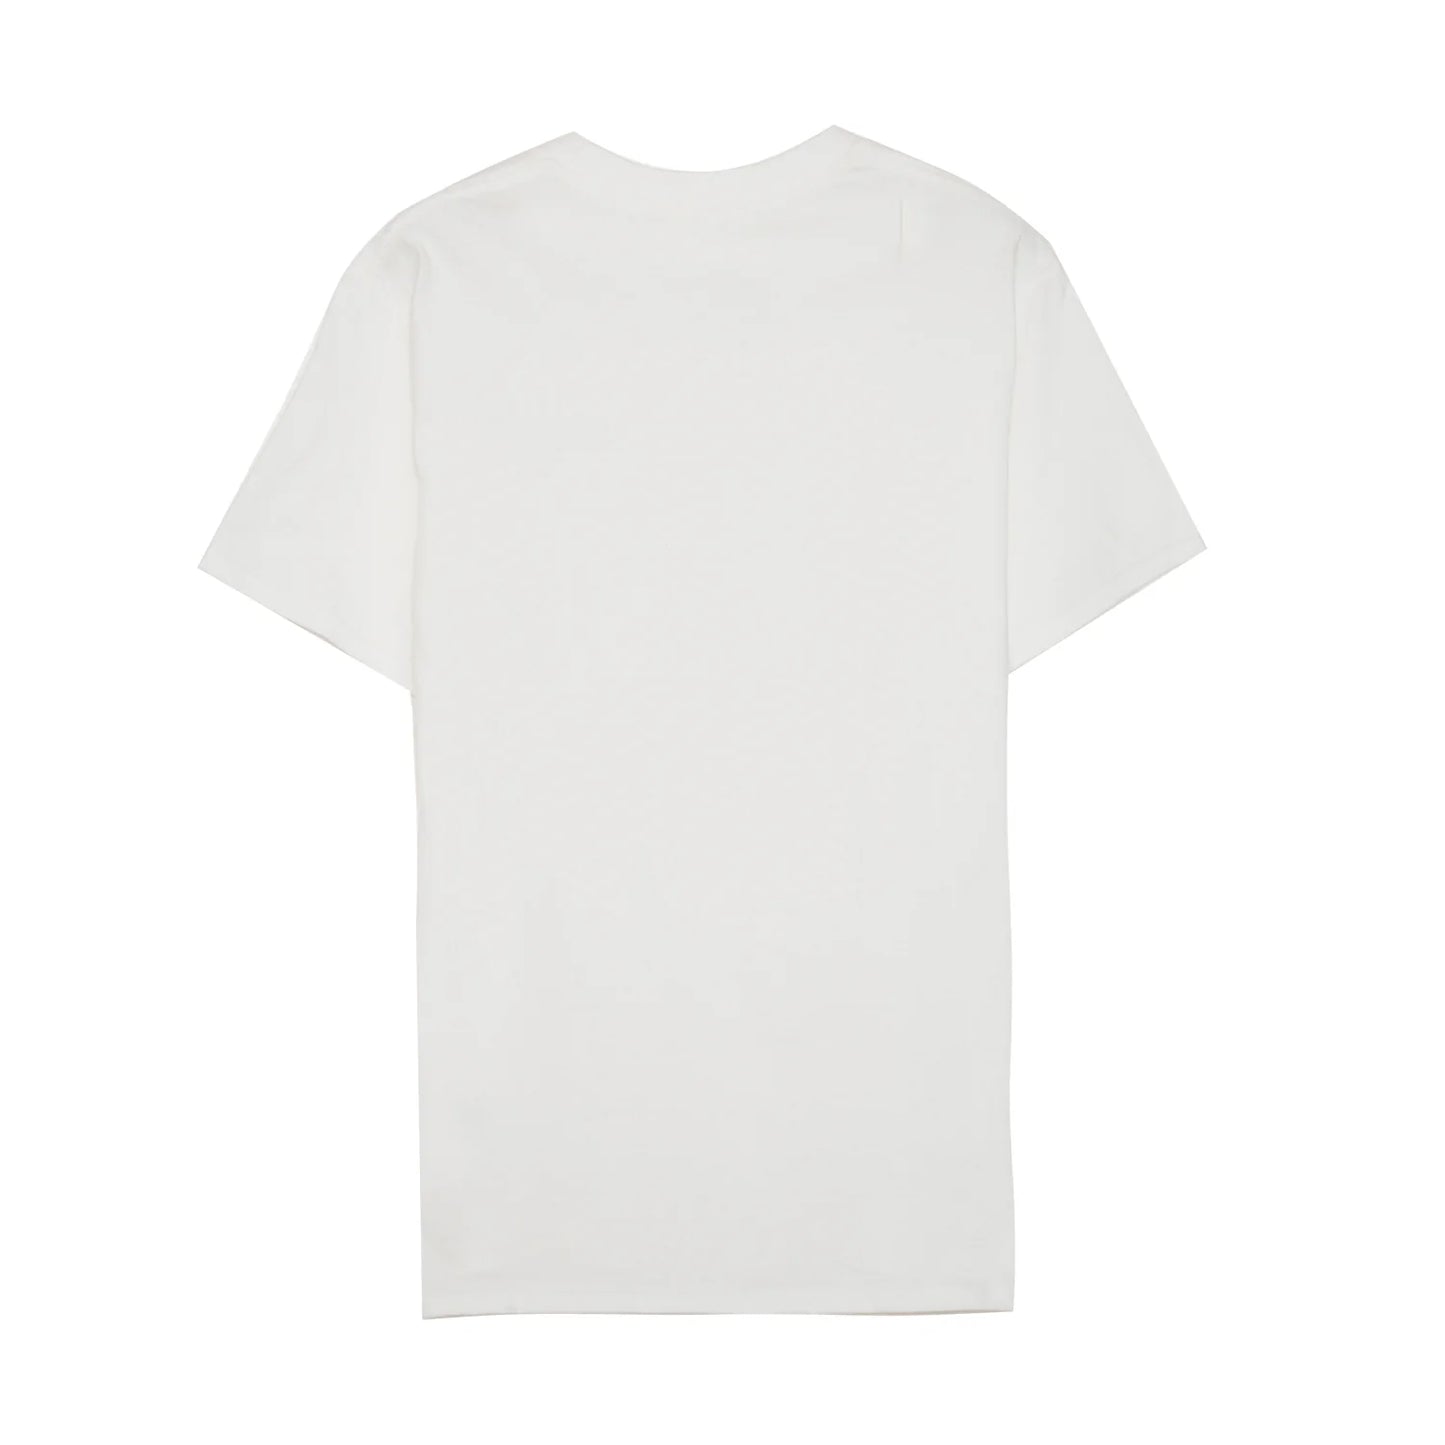 Aly Good Vibes - Goal Digger Tee (White)